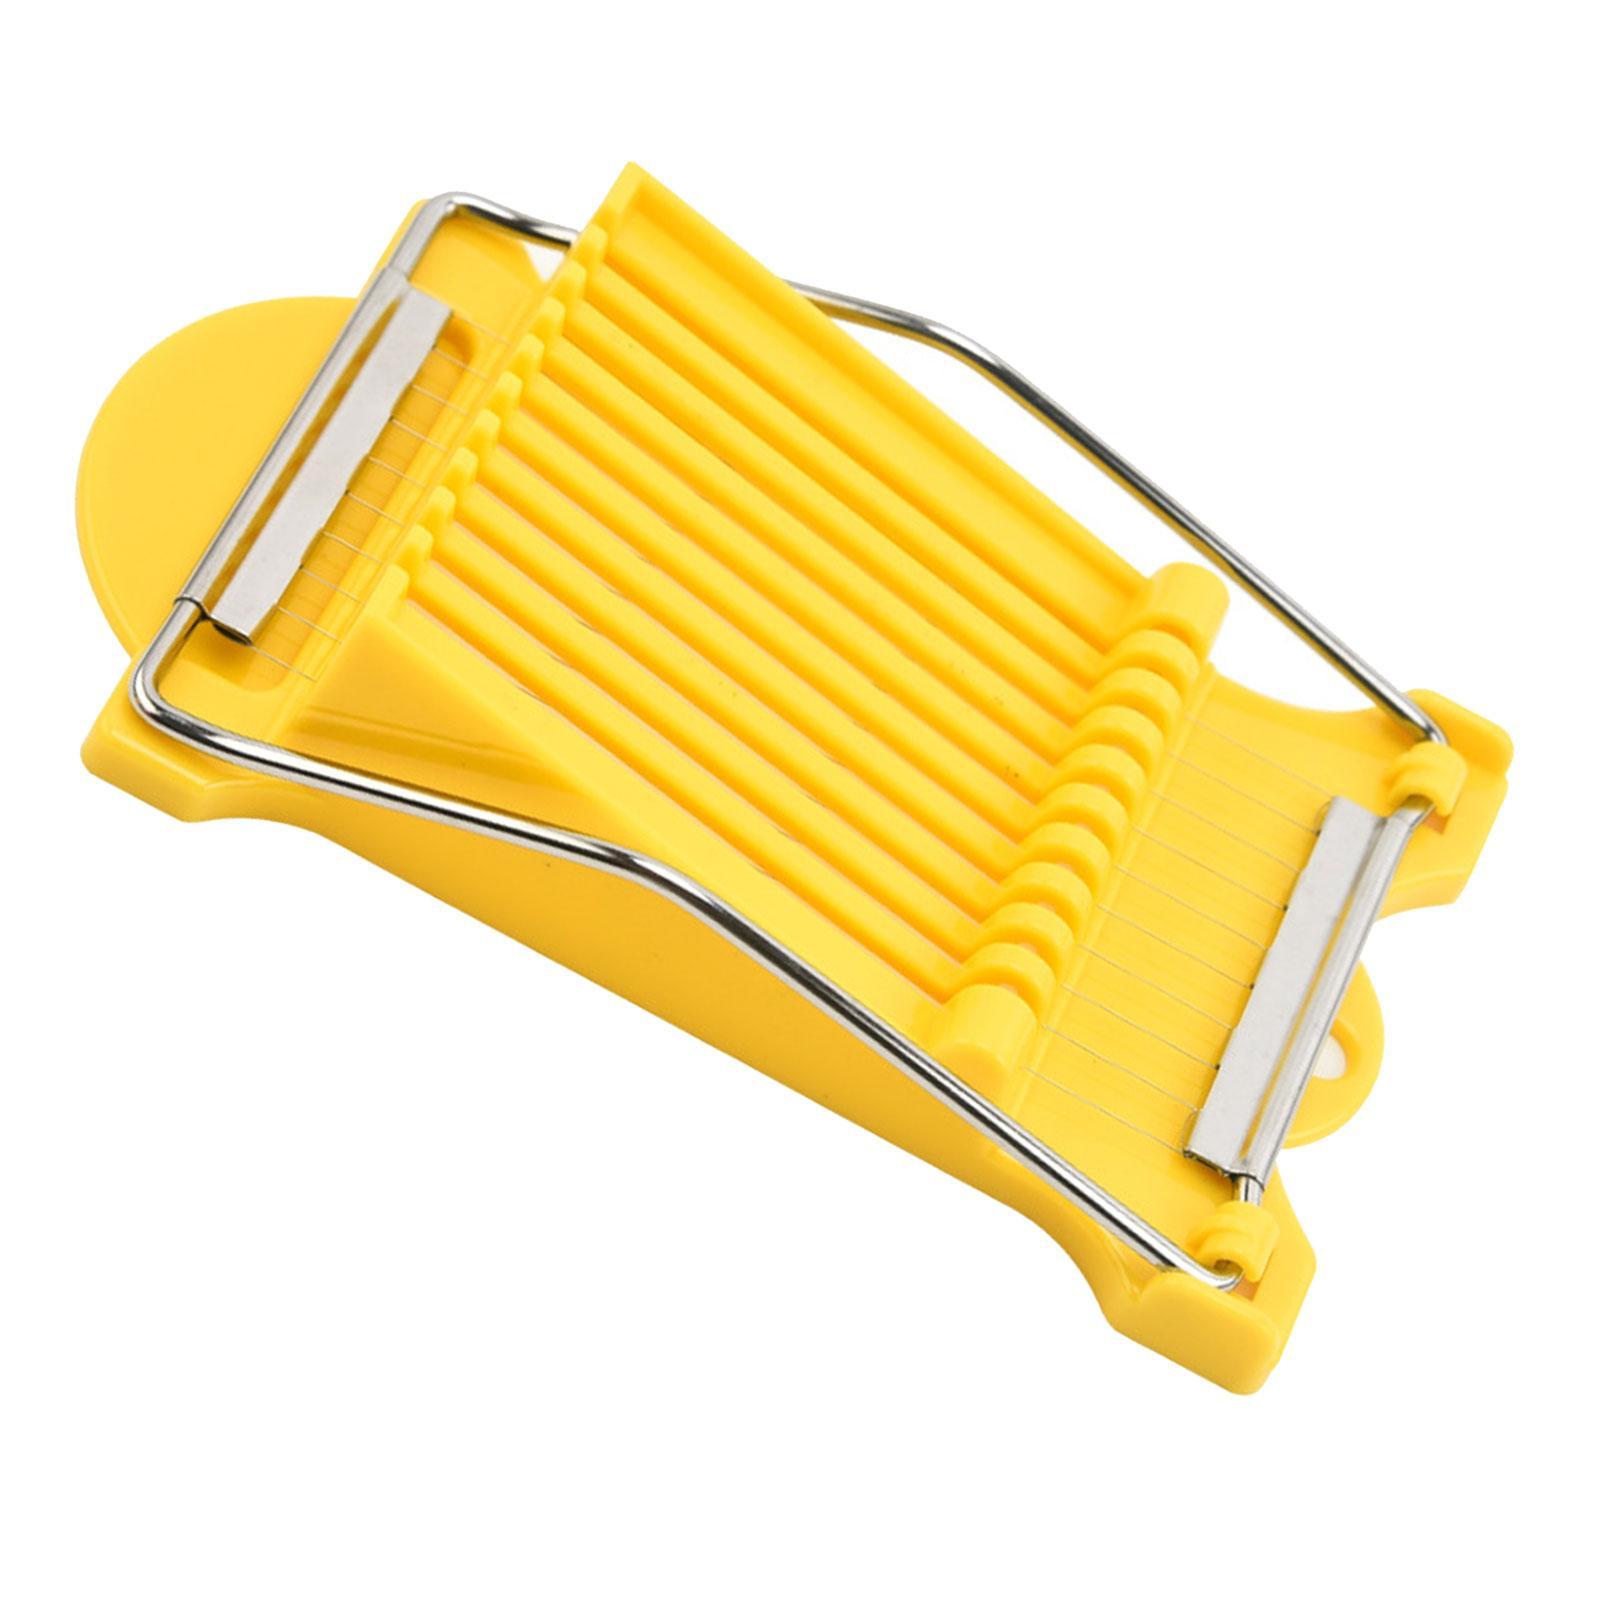 Cheese Slicer Cutter Convenient Durable Egg Slicer for Onions Soft Food Eggs